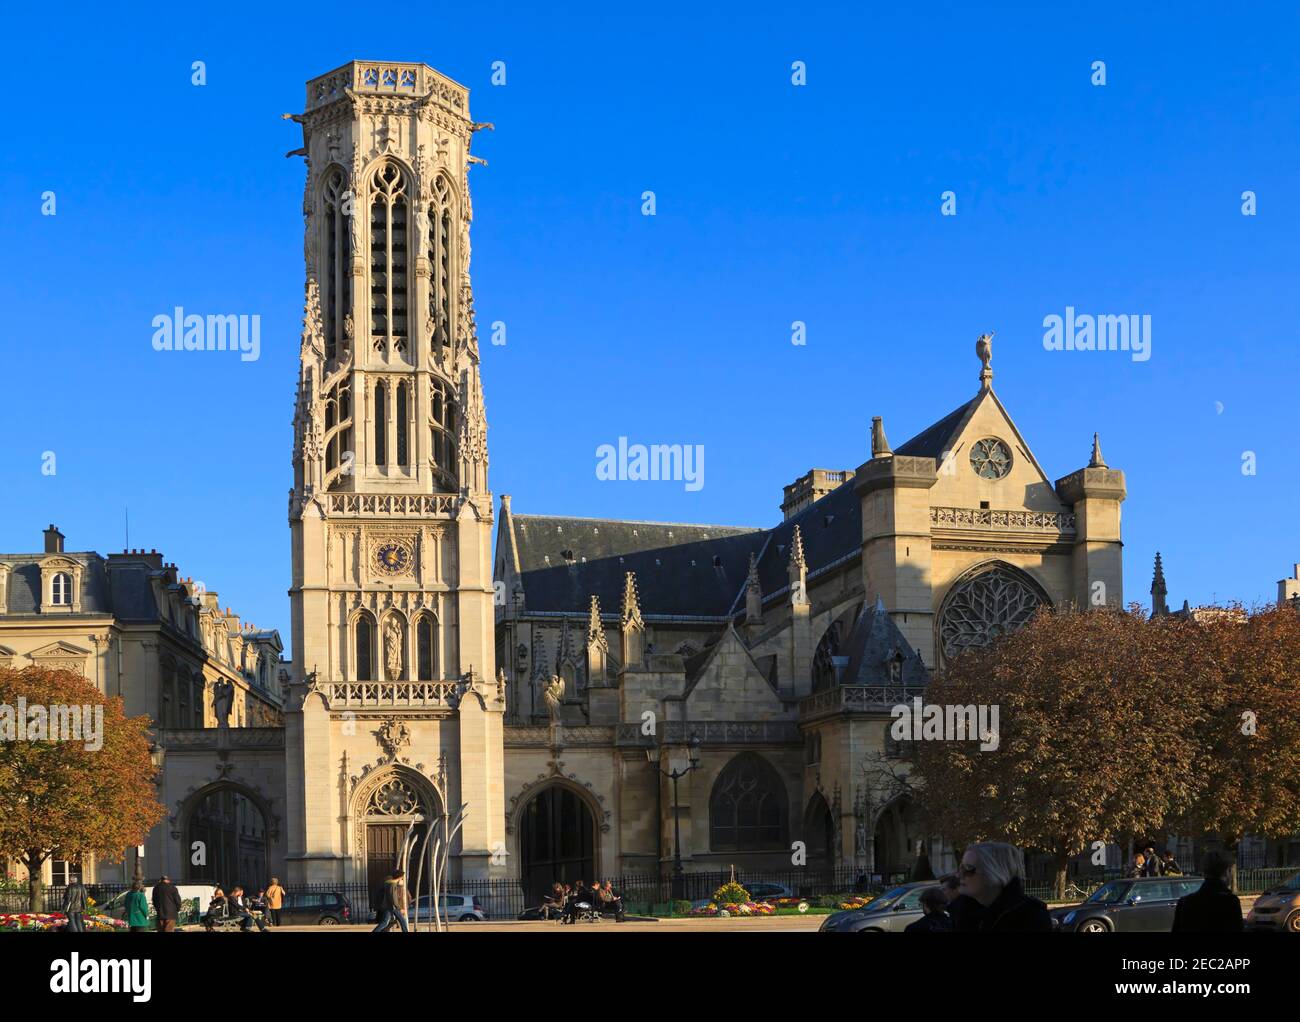 St Germain l'Auxerrois and the neo-Gothic belltower of the town hall of the 1st arrondissement,, Paris, France. Stock Photo